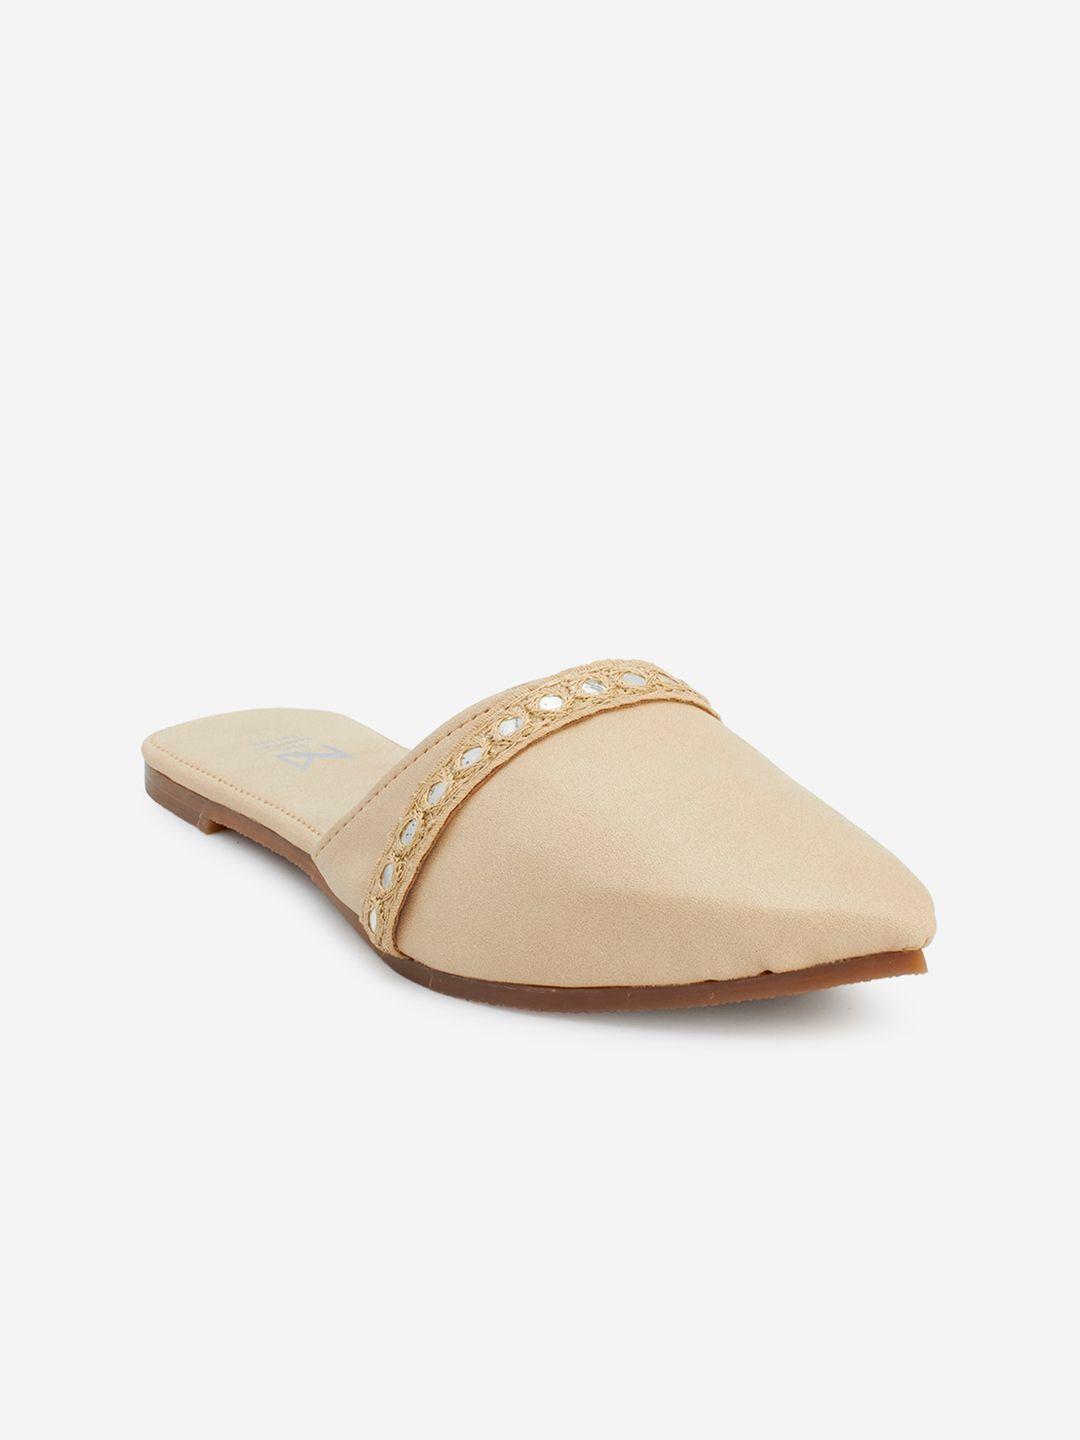 the madras trunk women beige embellished mules flats